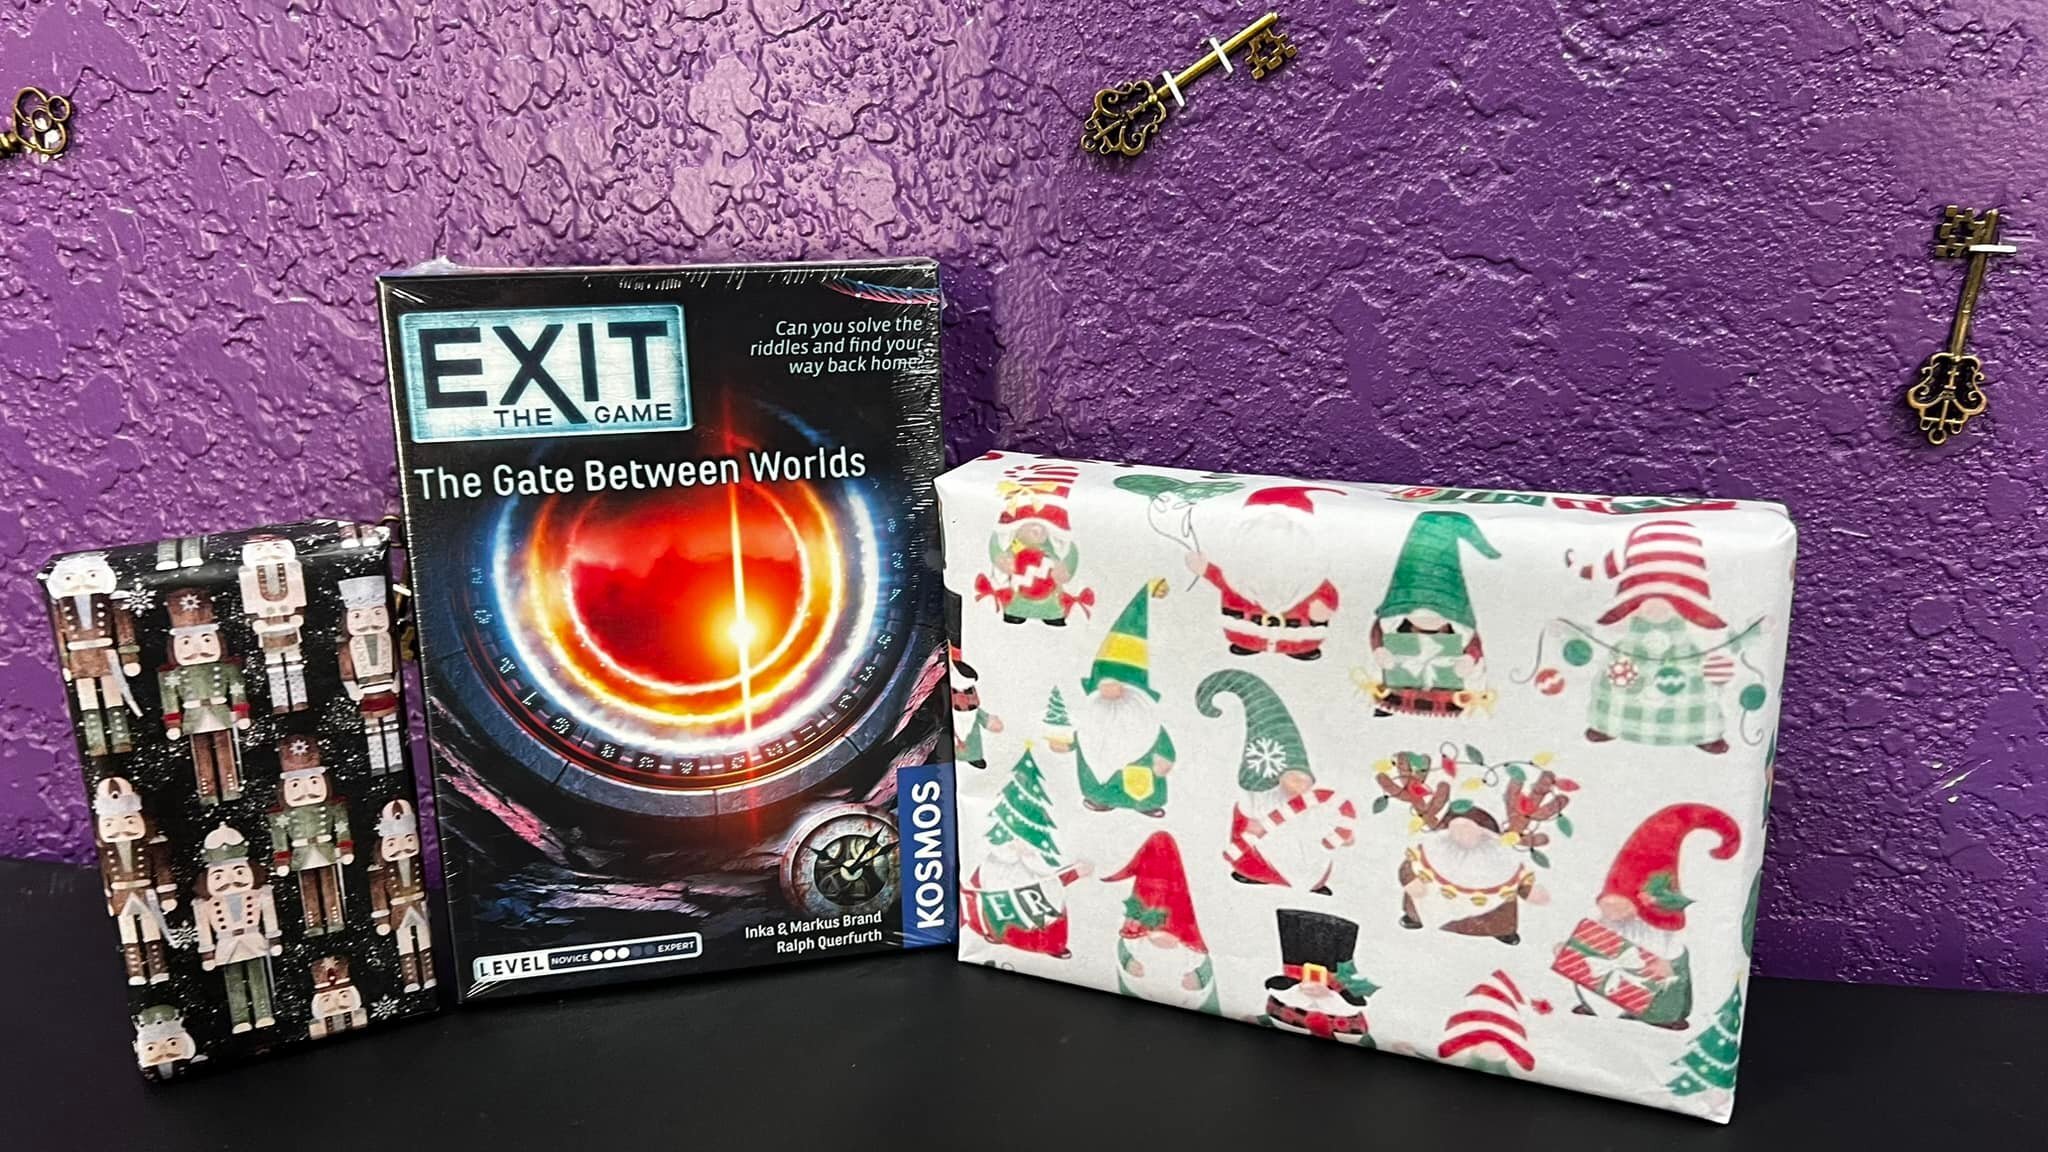 Get last minute gifts at boerne escape rooms! Escape room board games and gift cards are available.